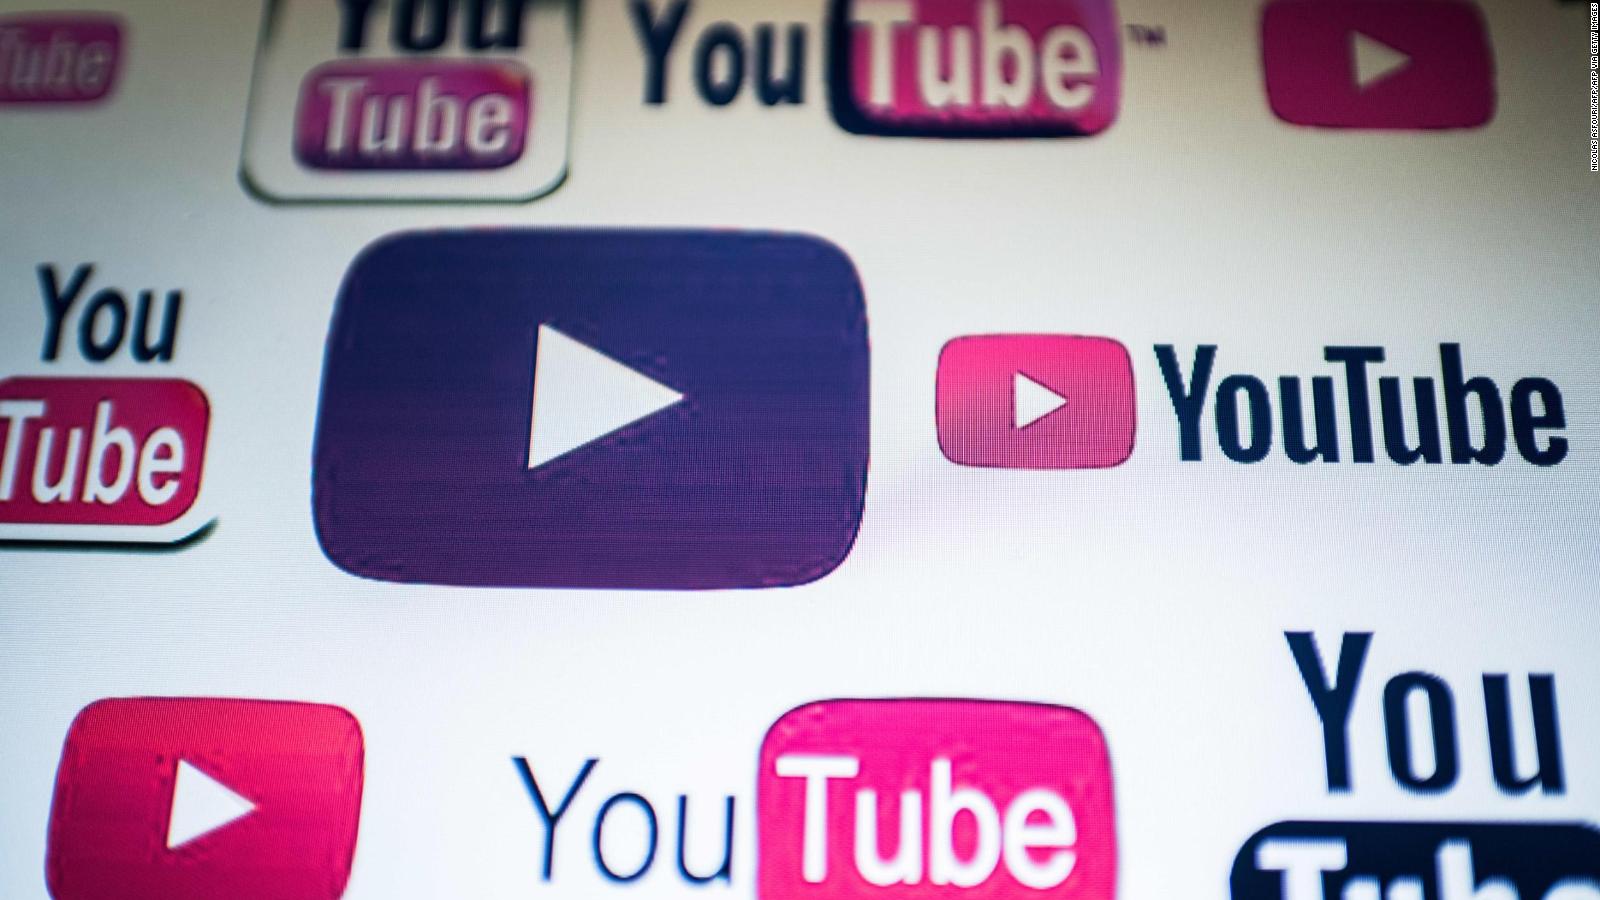 These were the 10 most popular YouTube videos in the US in 2021